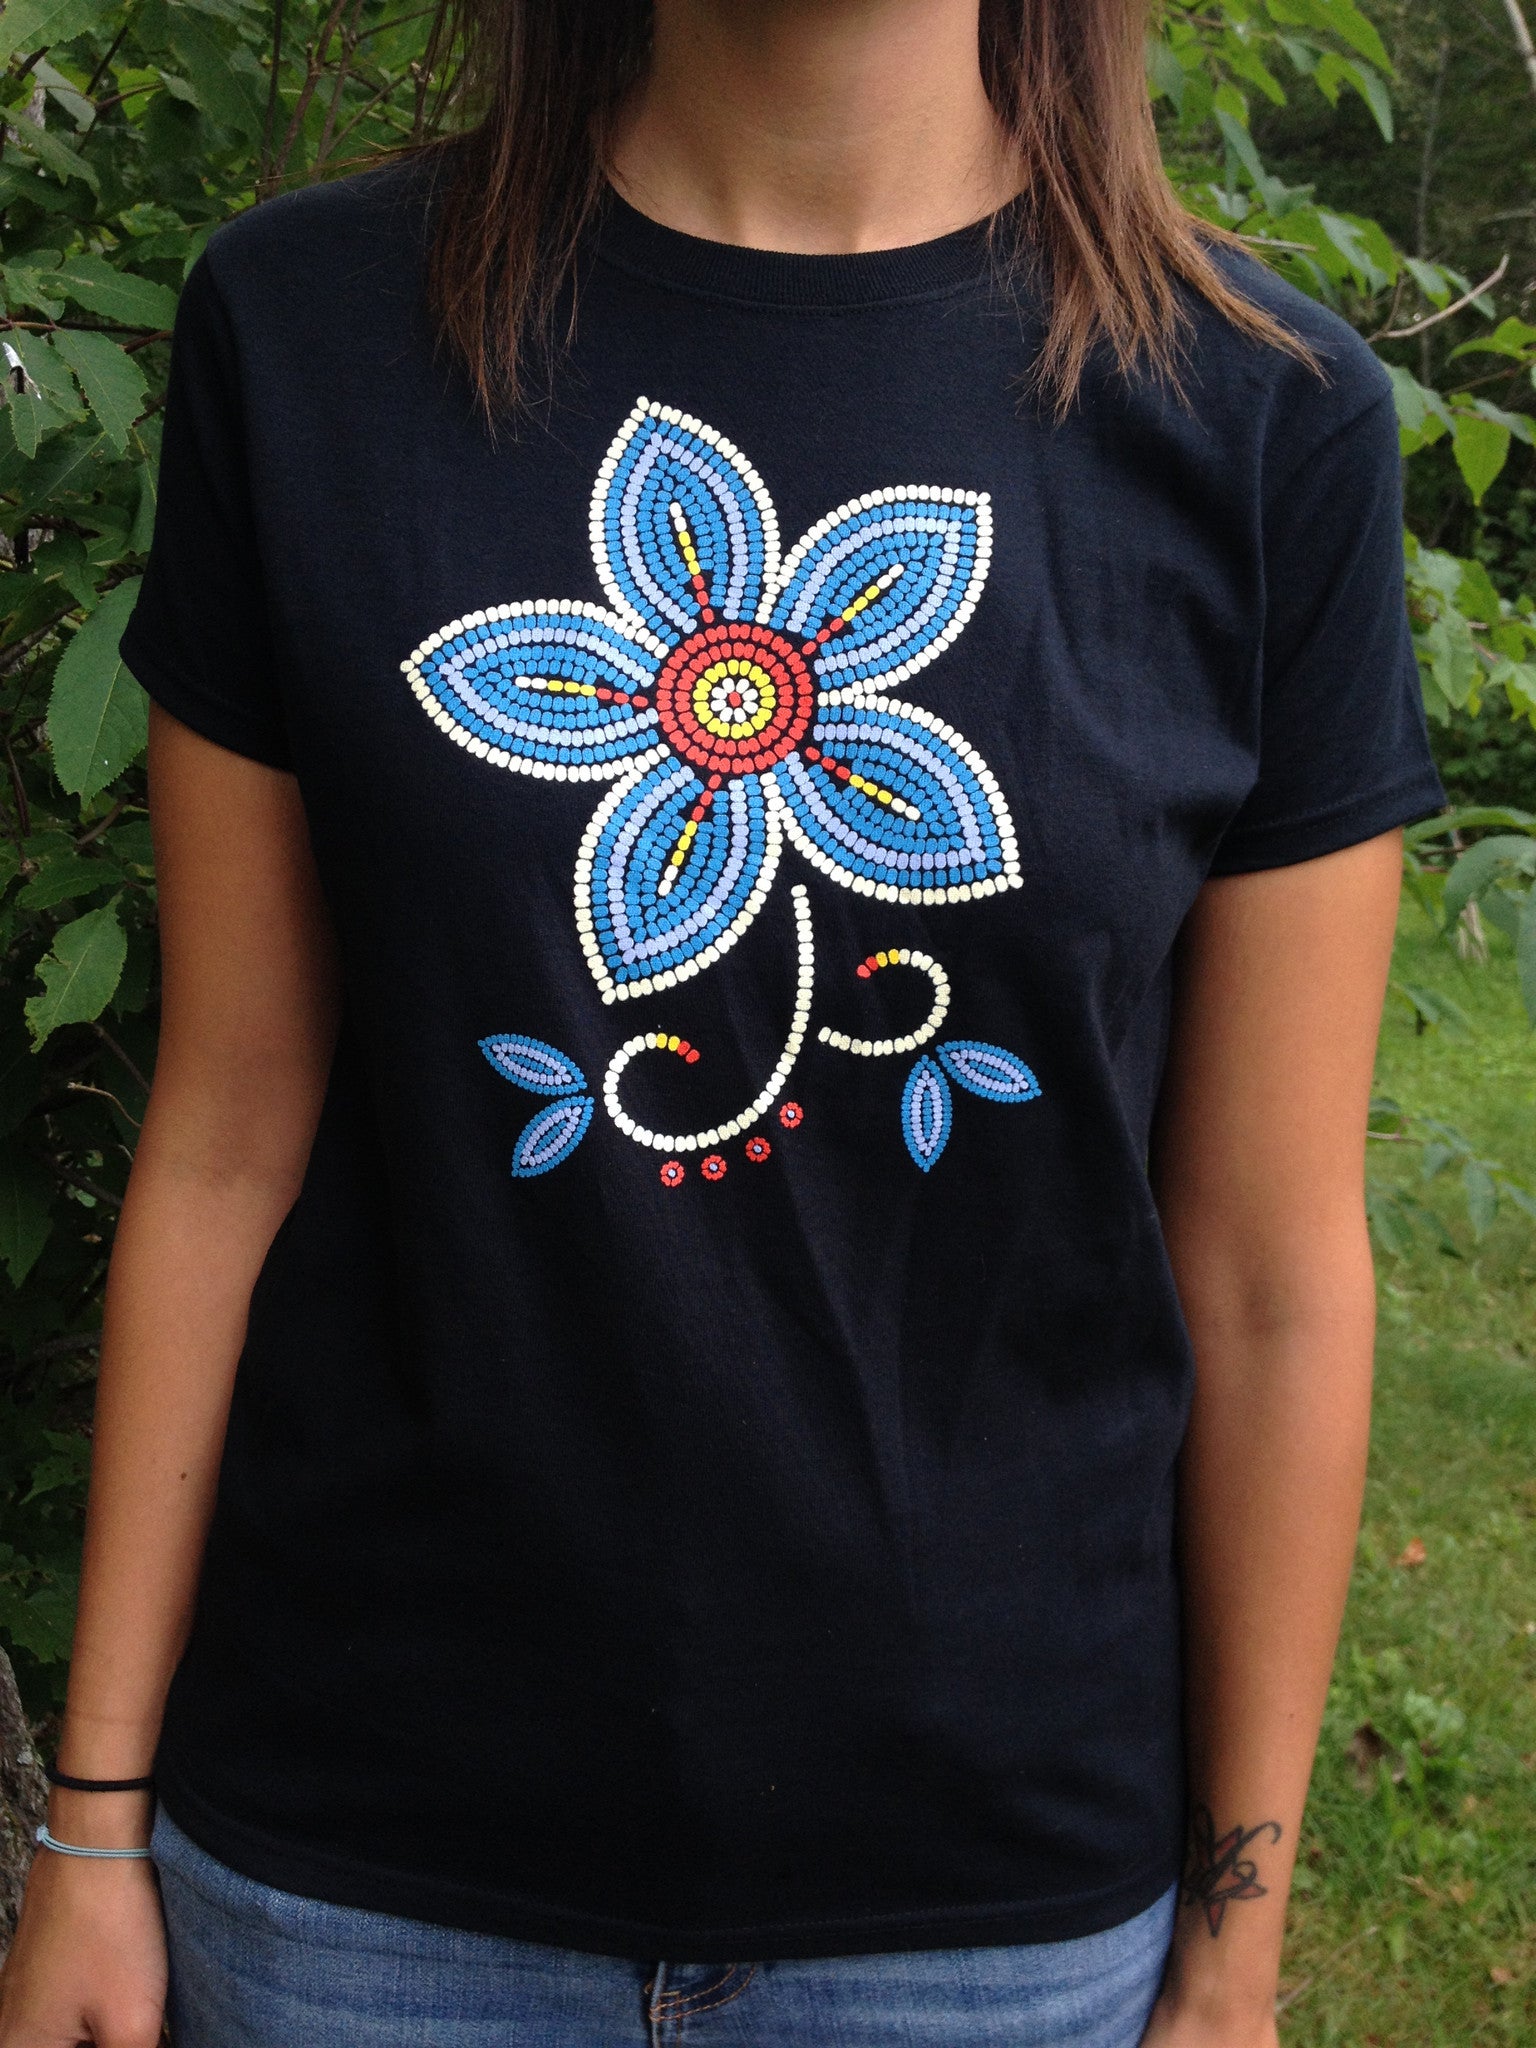 15% Off All House of Howes Orders to Celebrate One Year as an Inspired Native Artist!